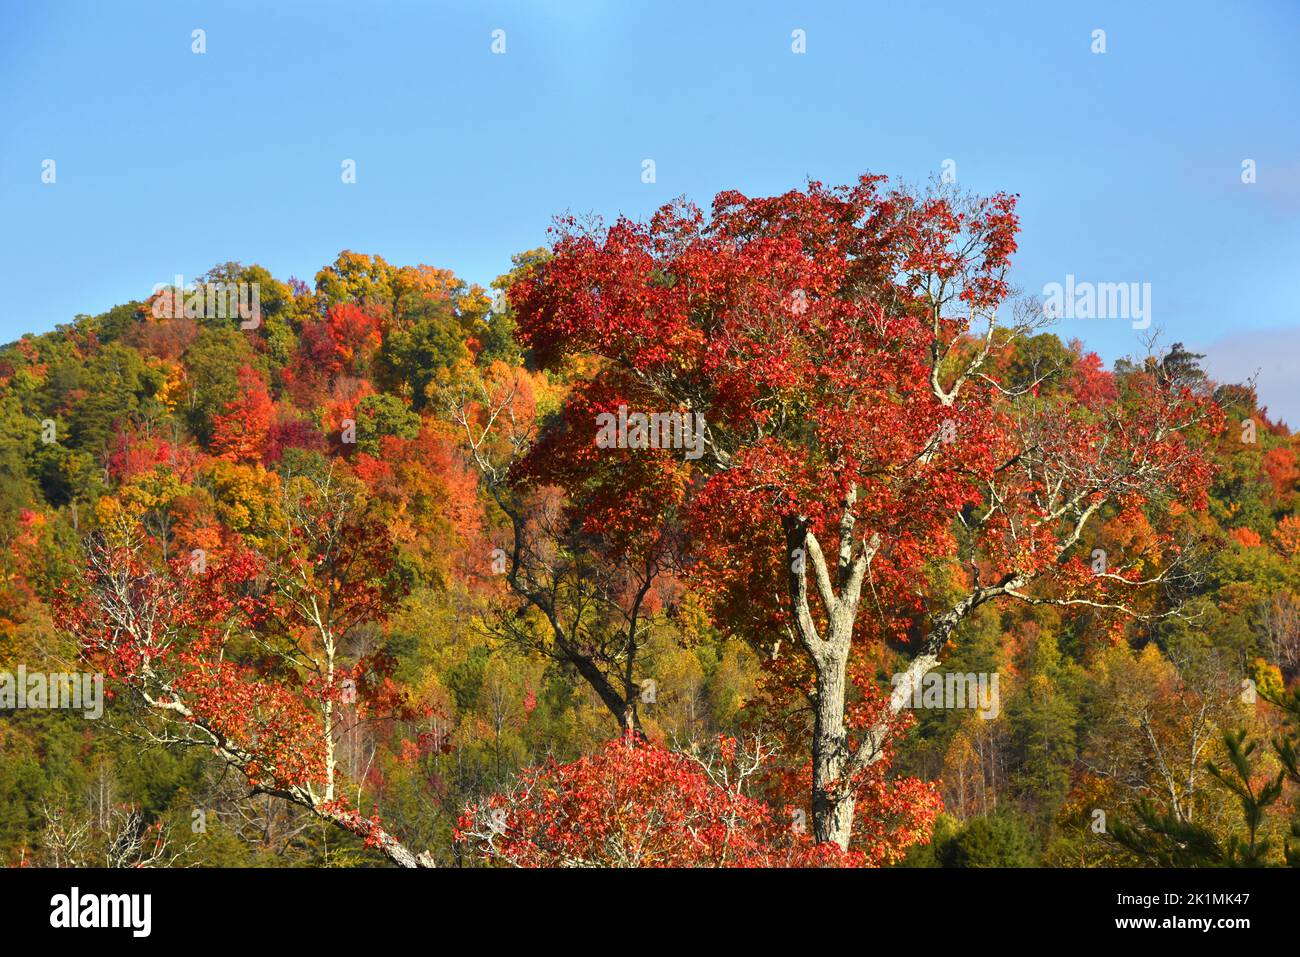 Tree stands in front of the Appalachian Mountains.  Both are covered in Fall color.  The tree is brilliant red in color. Stock Photo